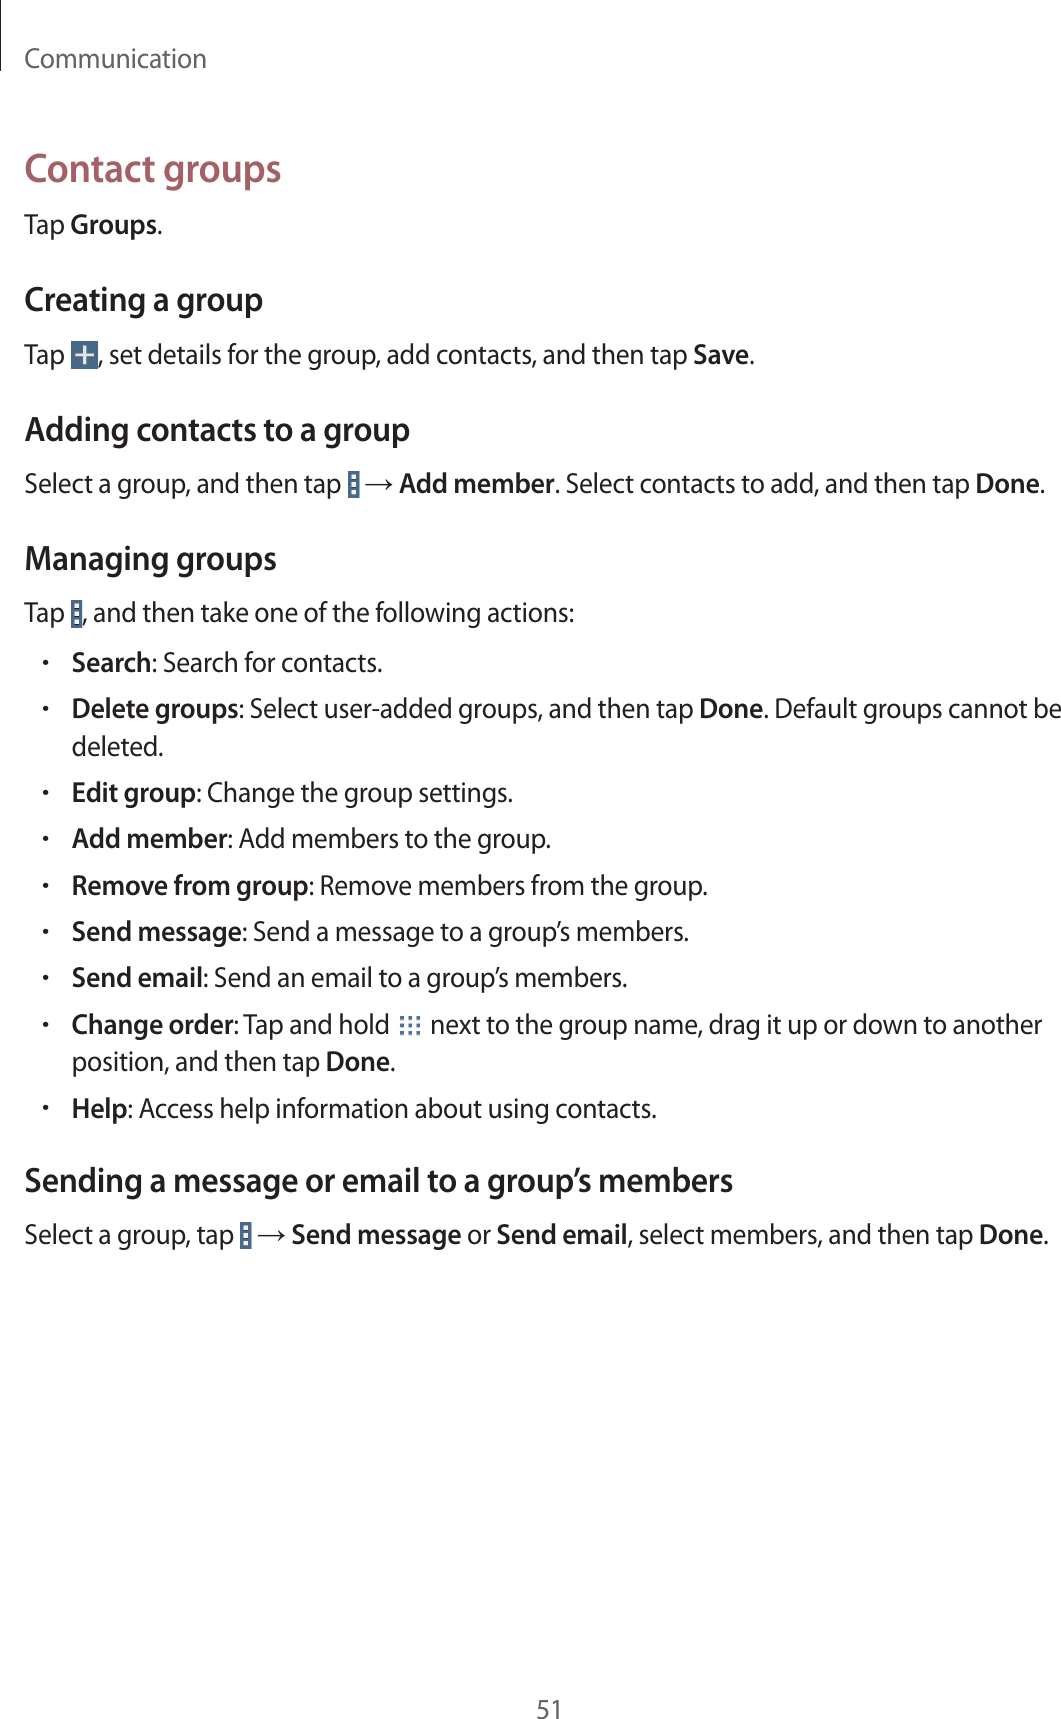 Communication51Contact groupsTap Groups.Creating a groupTap  , set details for the group, add contacts, and then tap Save.Adding contacts to a groupSelect a group, and then tap   → Add member. Select contacts to add, and then tap Done.Managing groupsTap  , and then take one of the following actions:•Search: Search for contacts.•Delete groups: Select user-added groups, and then tap Done. Default groups cannot be deleted.•Edit group: Change the group settings.•Add member: Add members to the group.•Remove from group: Remove members from the group.•Send message: Send a message to a group’s members.•Send email: Send an email to a group’s members.•Change order: Tap and hold   next to the group name, drag it up or down to another position, and then tap Done.•Help: Access help information about using contacts.Sending a message or email to a group’s membersSelect a group, tap   → Send message or Send email, select members, and then tap Done.